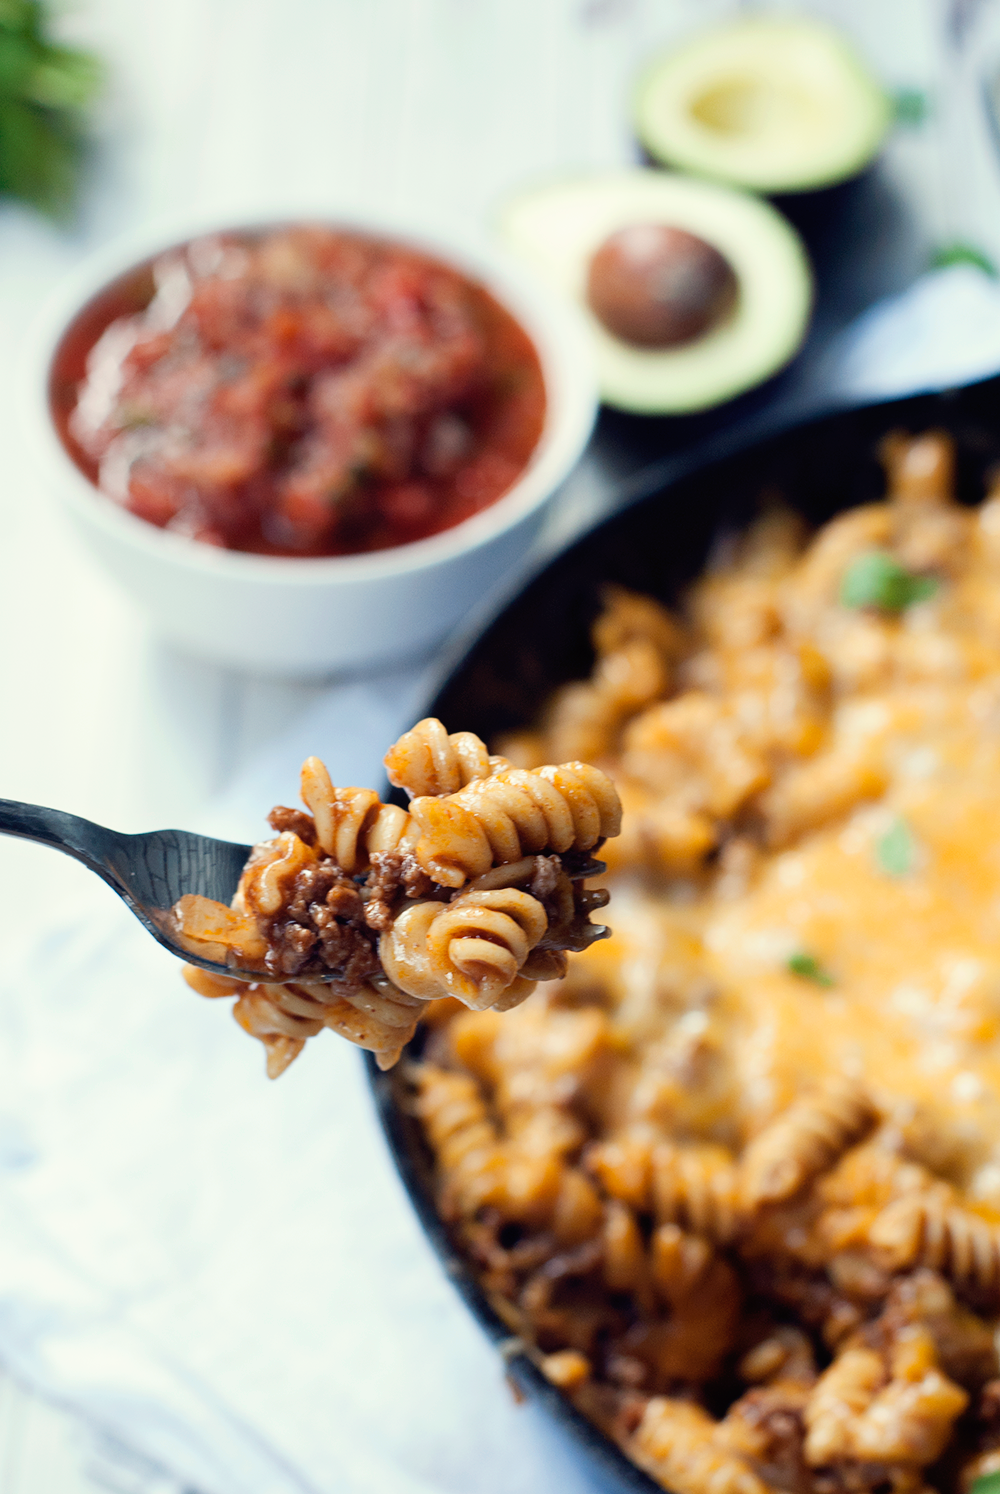 This one pot enchilada pasta proves that Mexican food means more than just tortillas! I could make this everyday, it's so delicious!